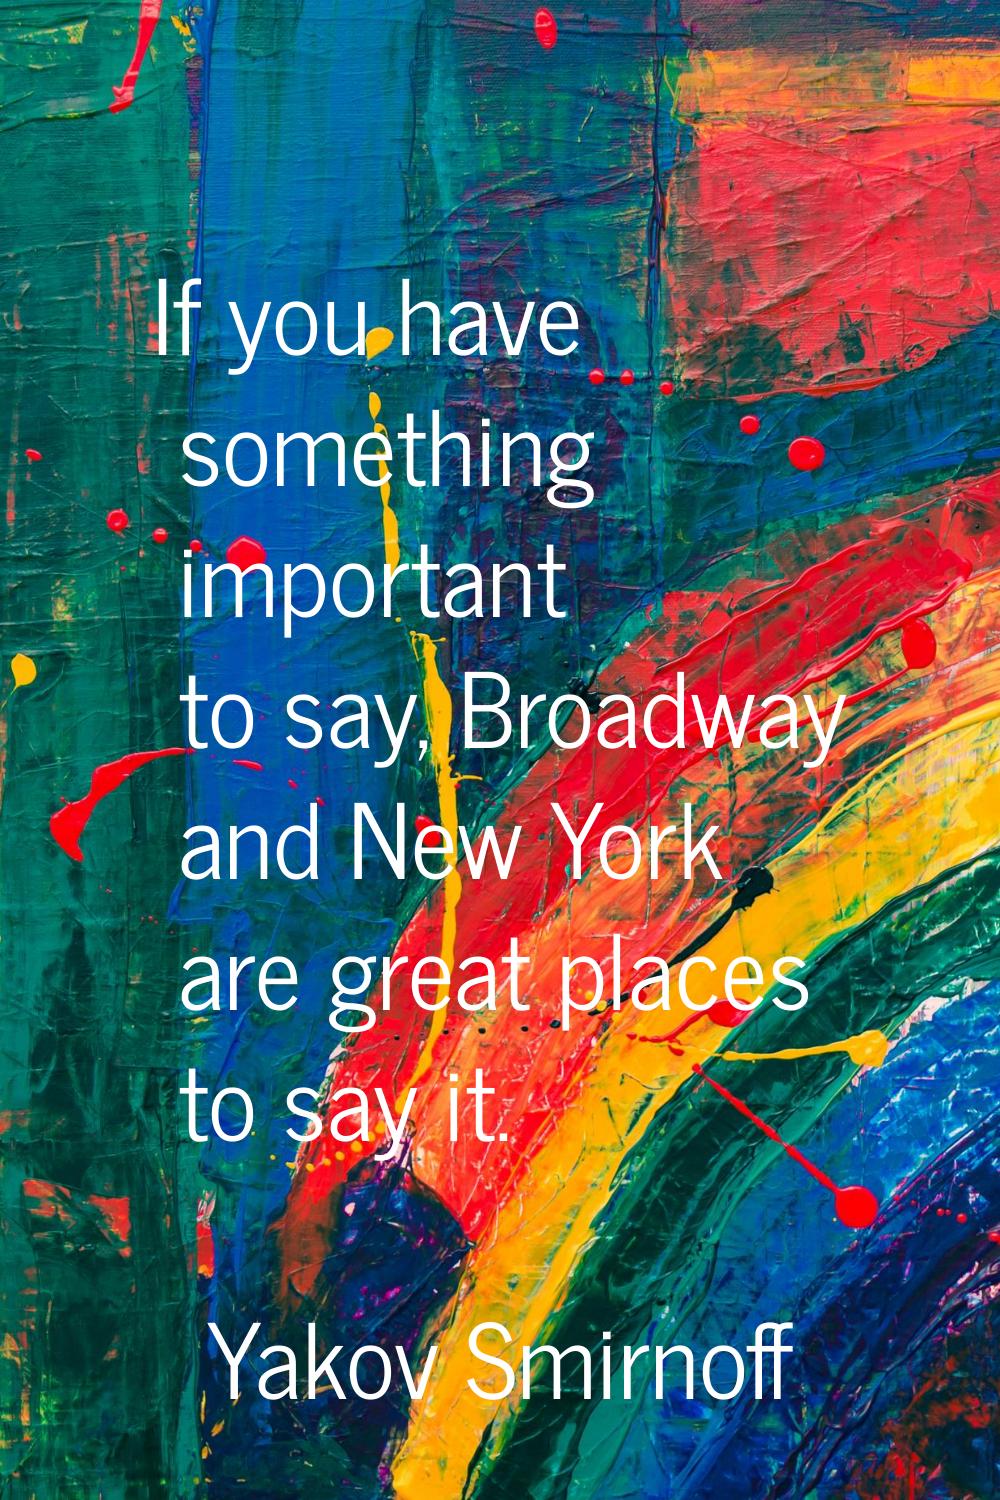 If you have something important to say, Broadway and New York are great places to say it.